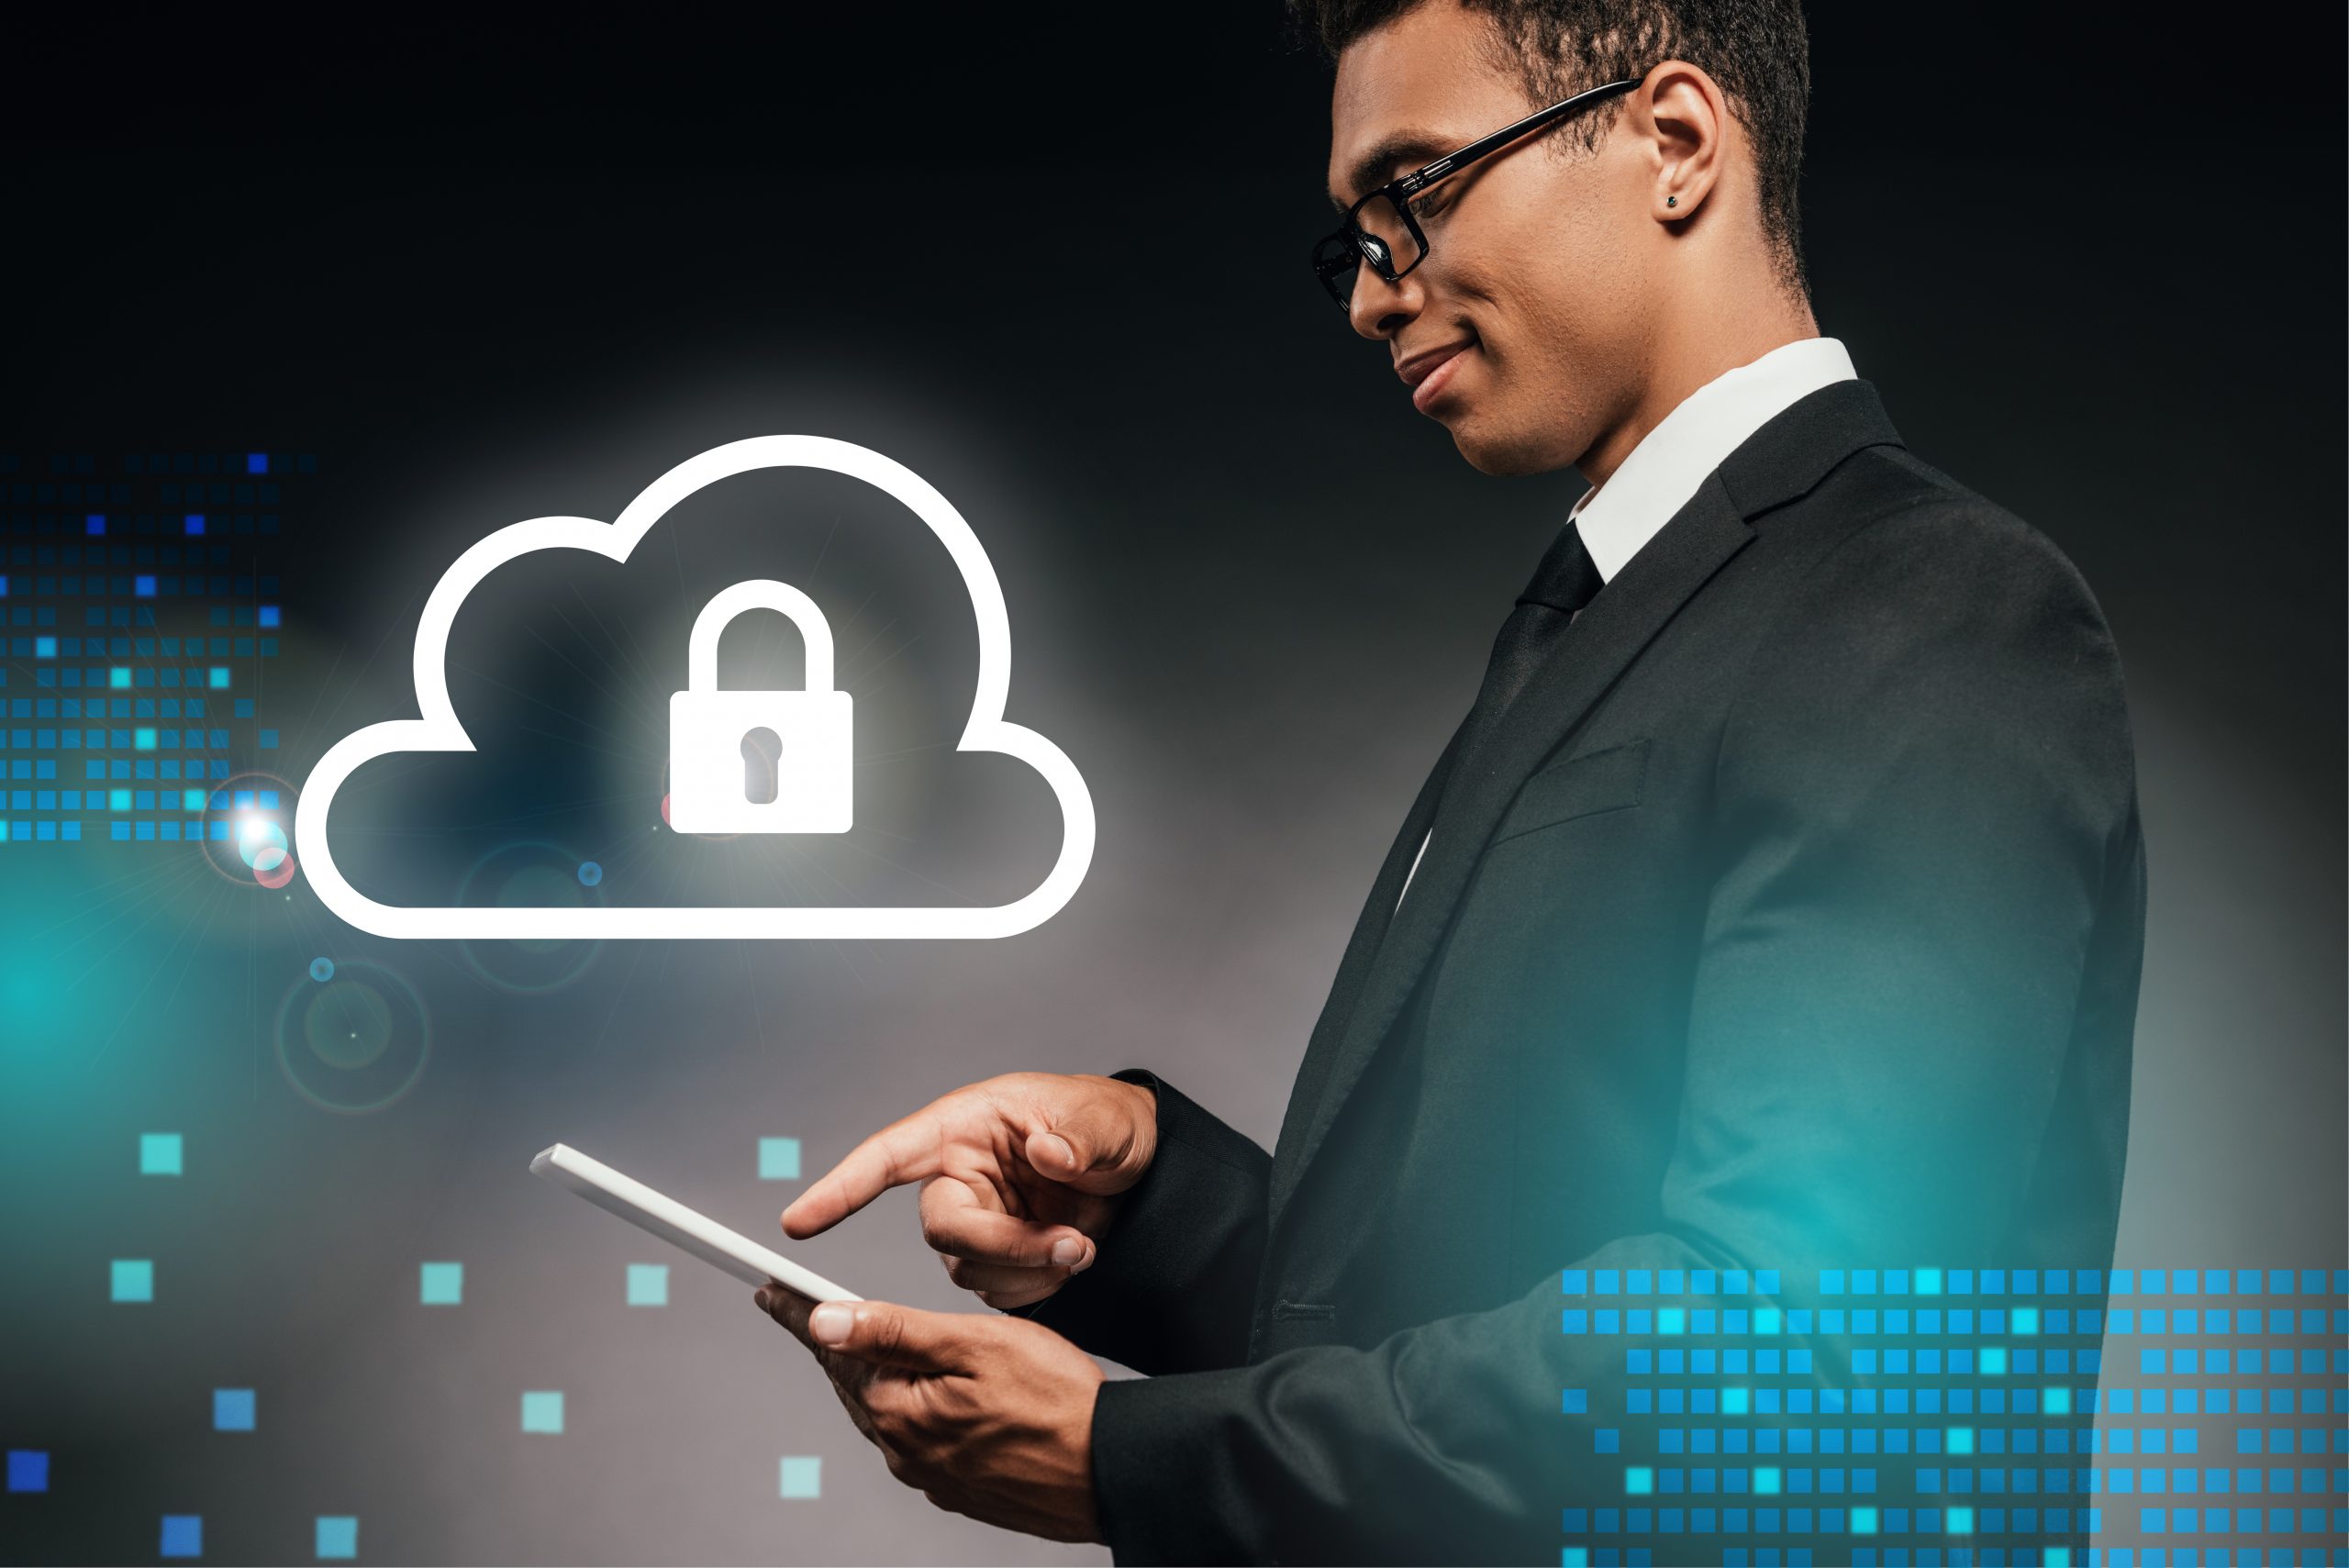 A person securing cloud access